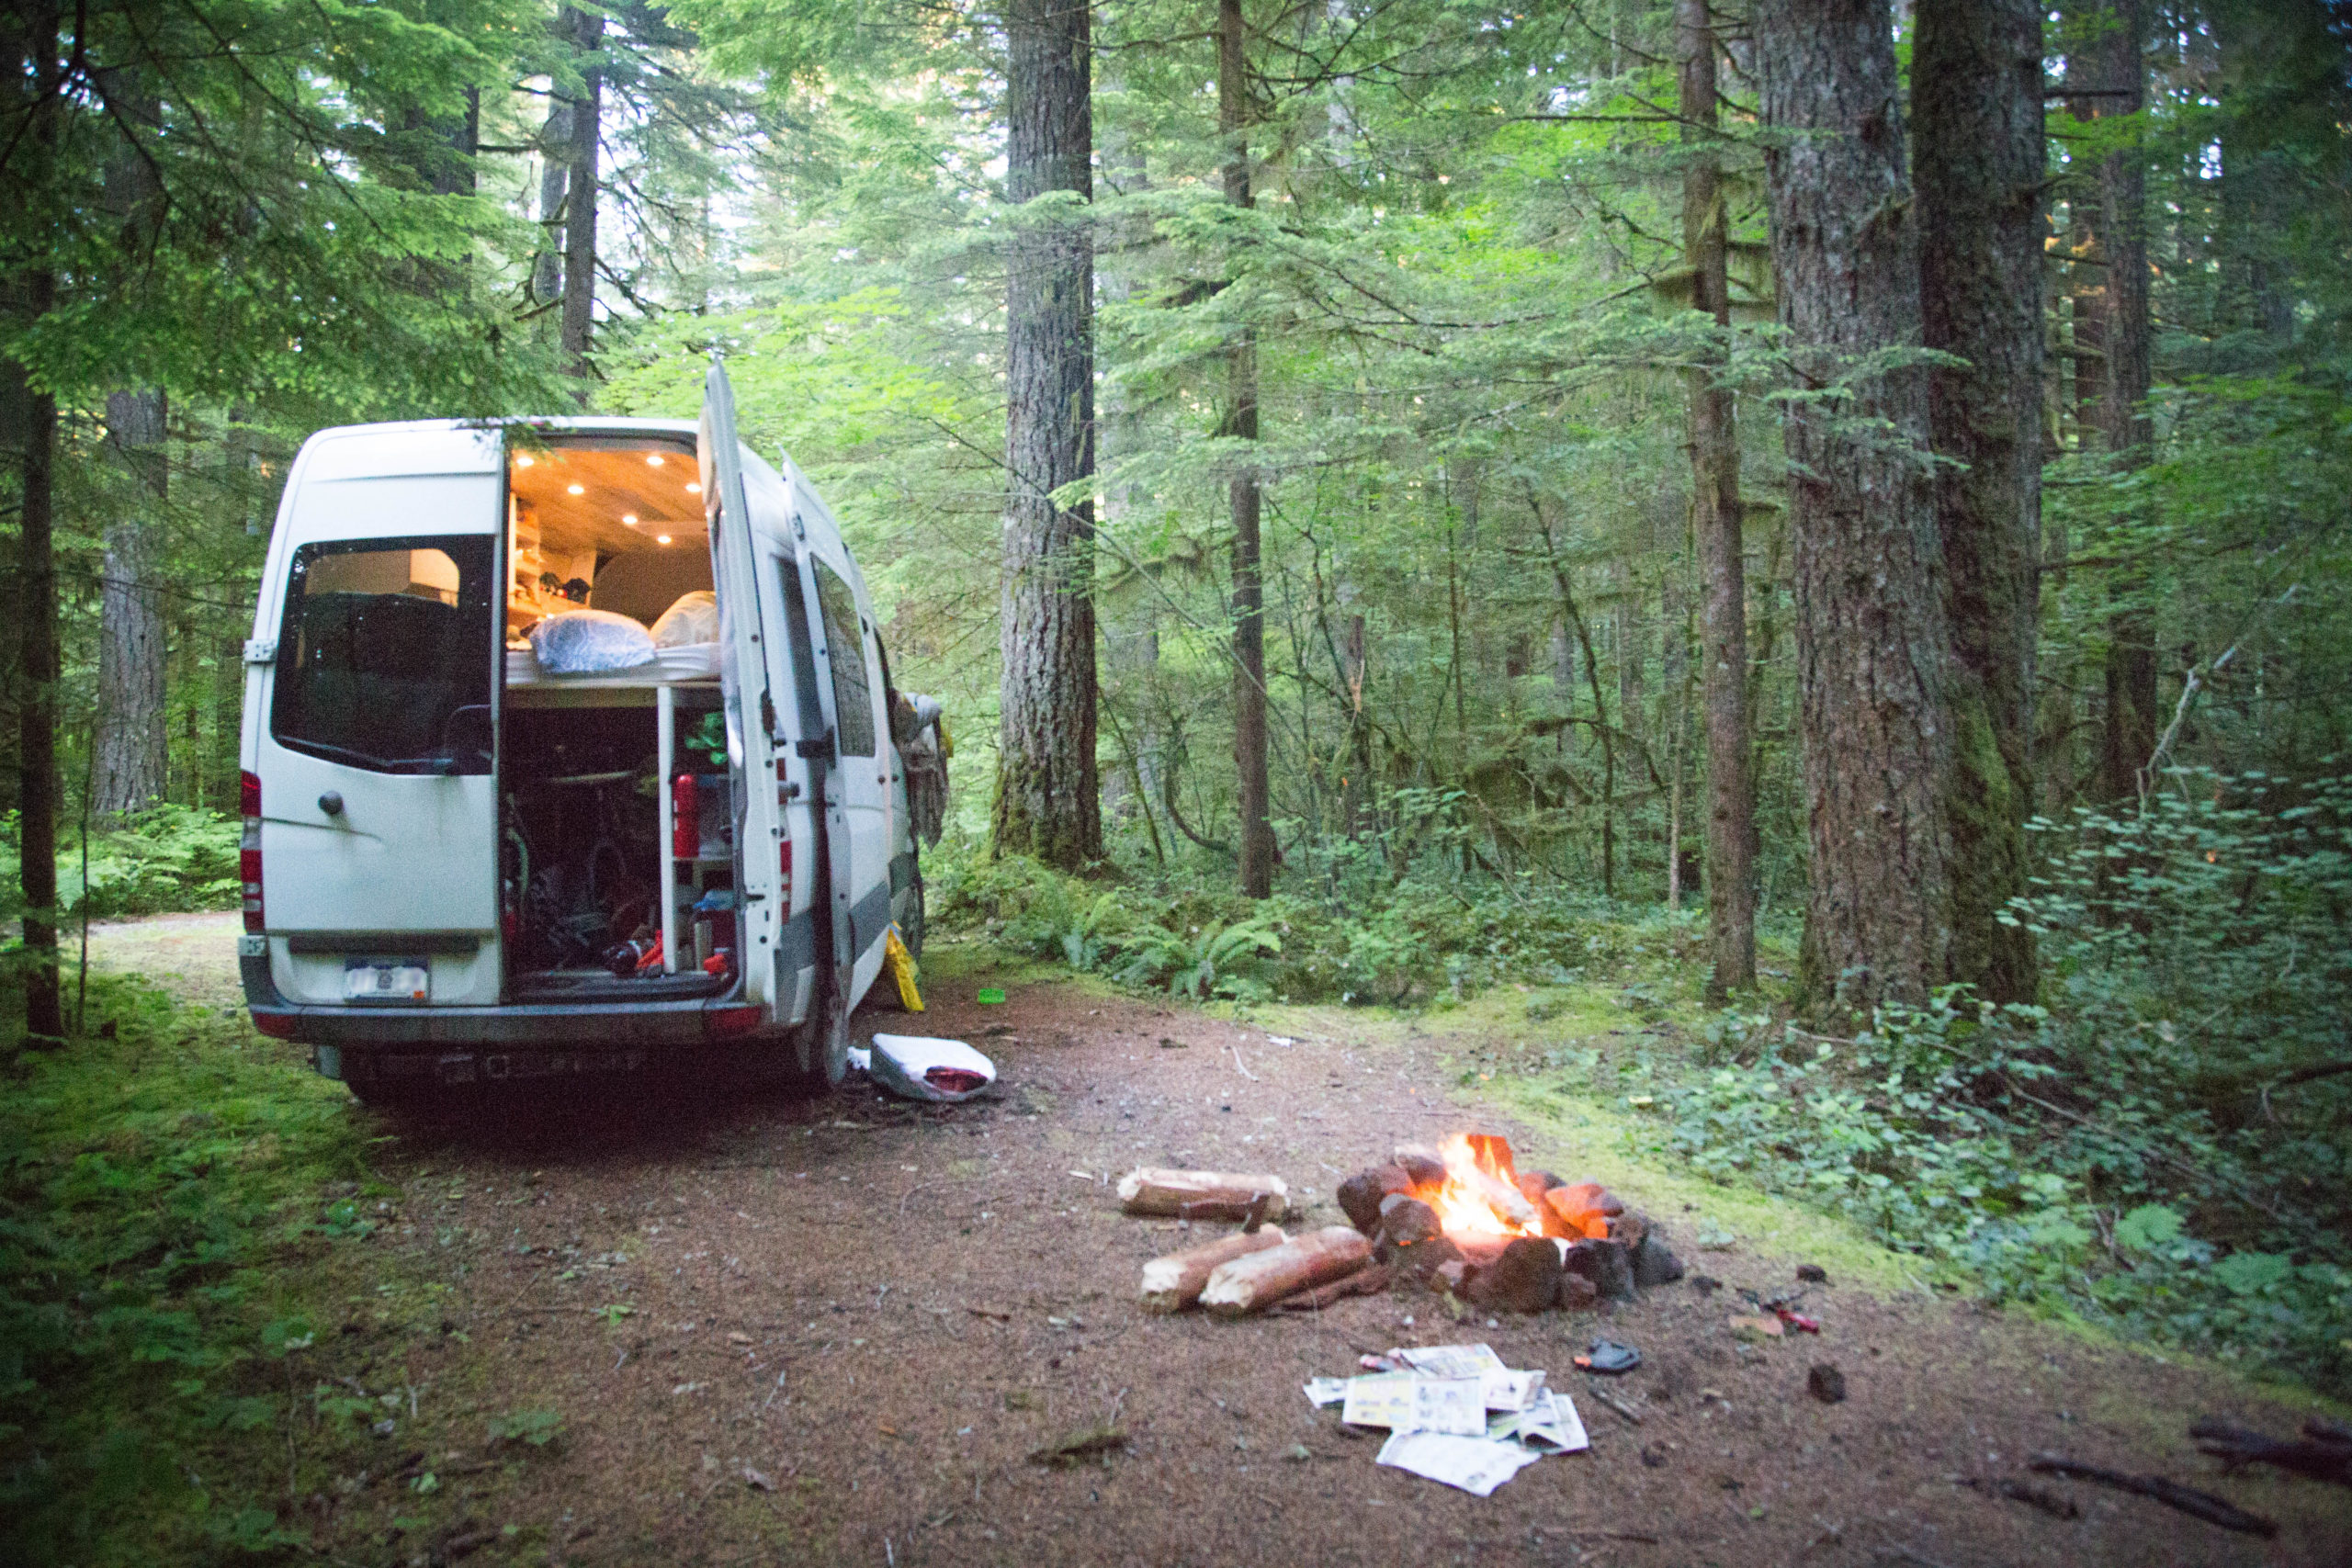 We love our free campsites!